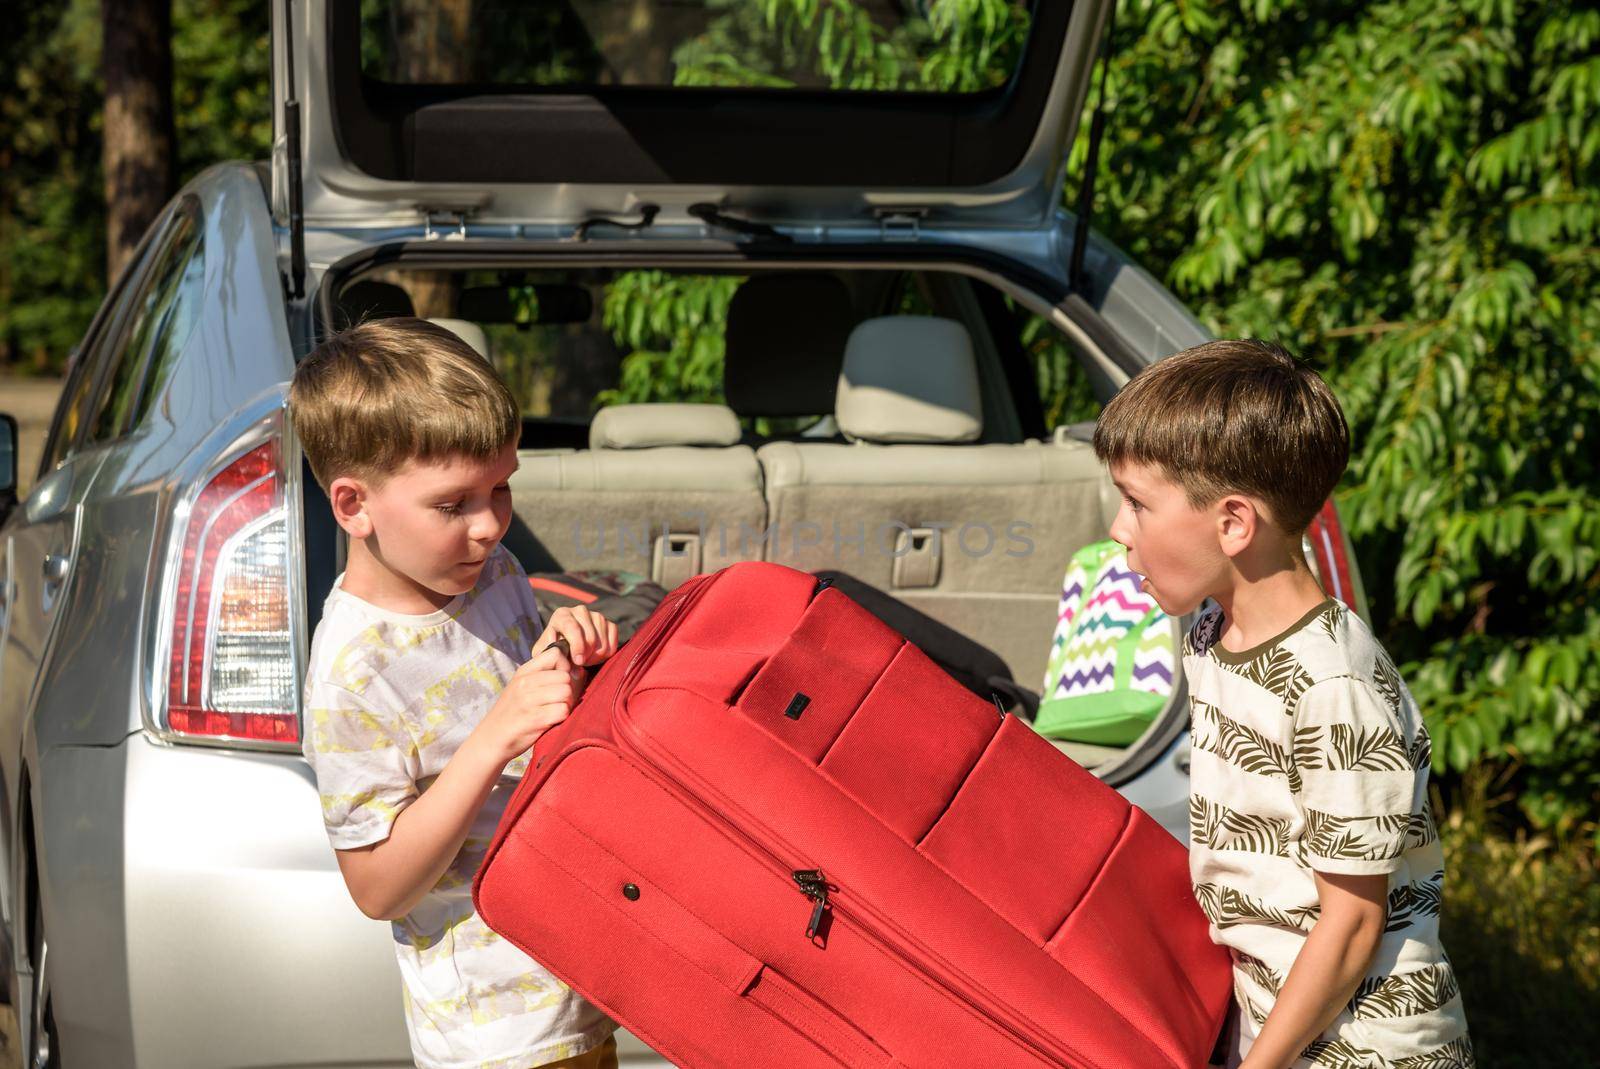 Two adorable boys holding a suitcase going on vacations with their parents. Two kids looking forward for a road trip or travel. Family travel by car.